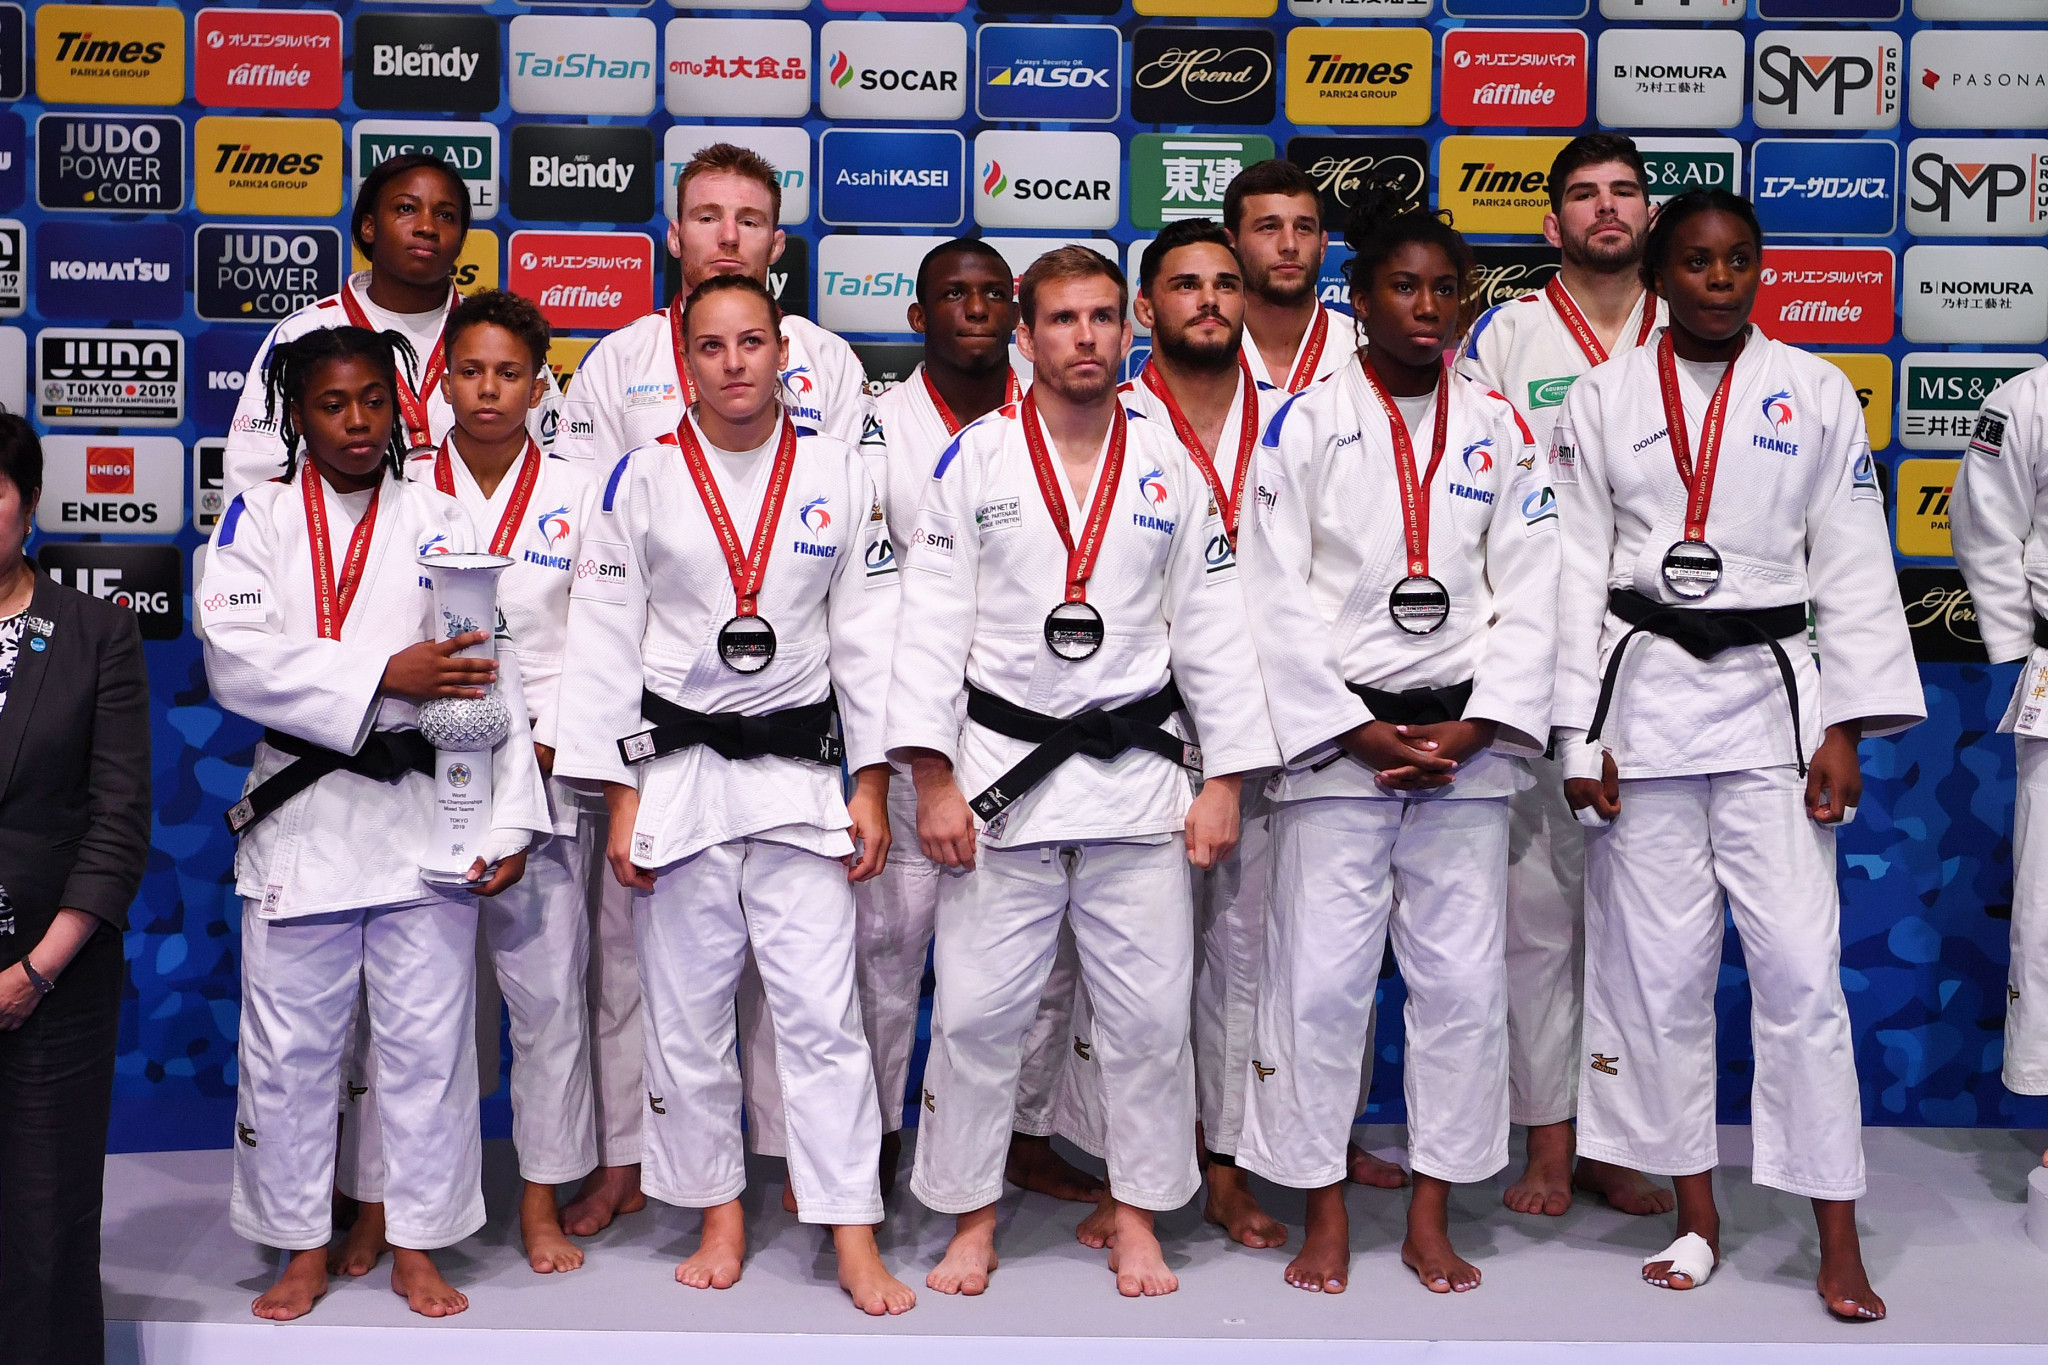 Mixed team judo will debut at the Tokyo 2020 Olympics ©Getty Images